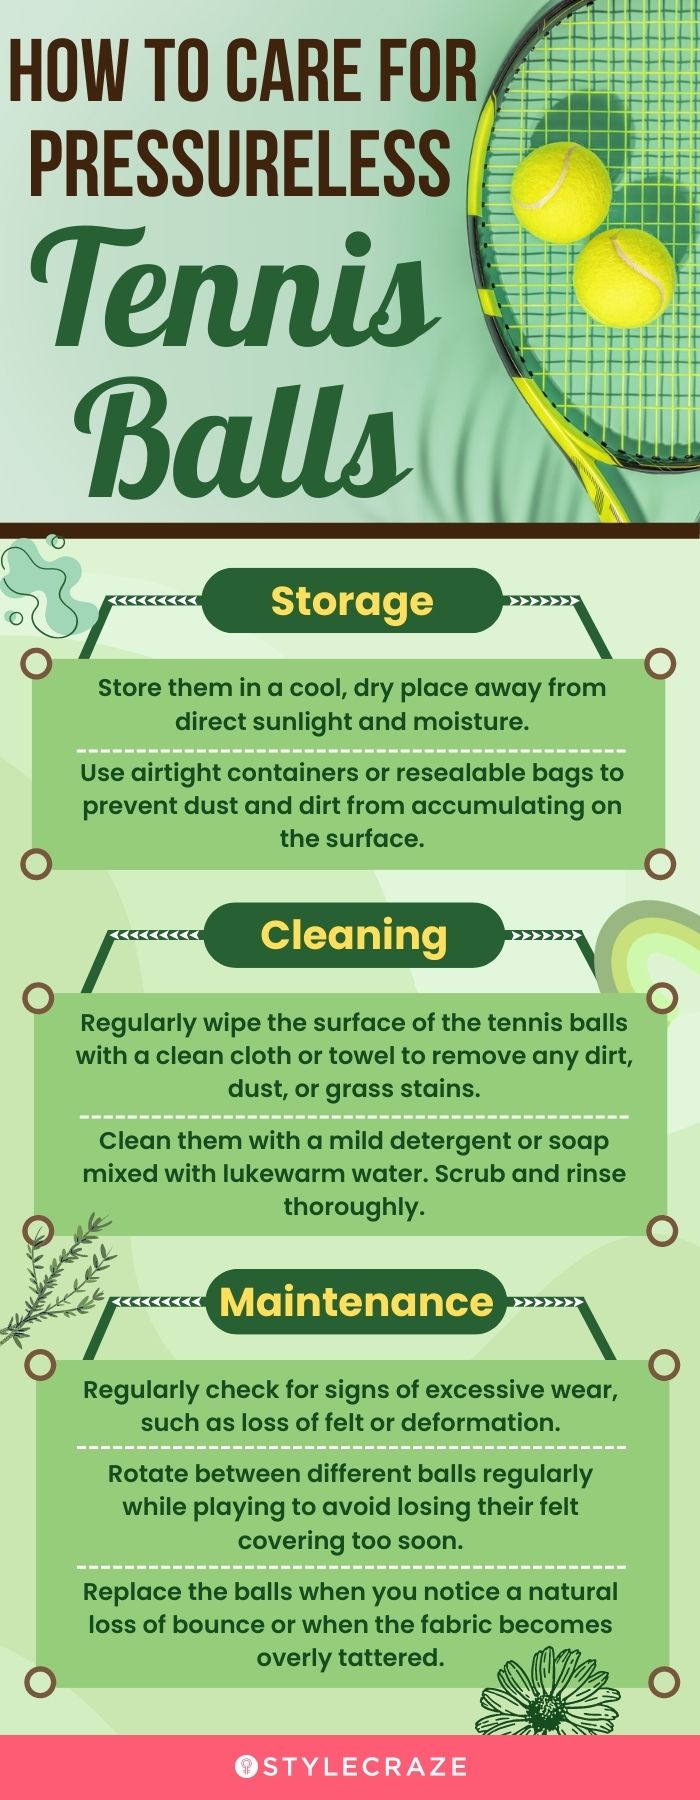 How To Caring For Pressureless Tennis Balls (infographic)